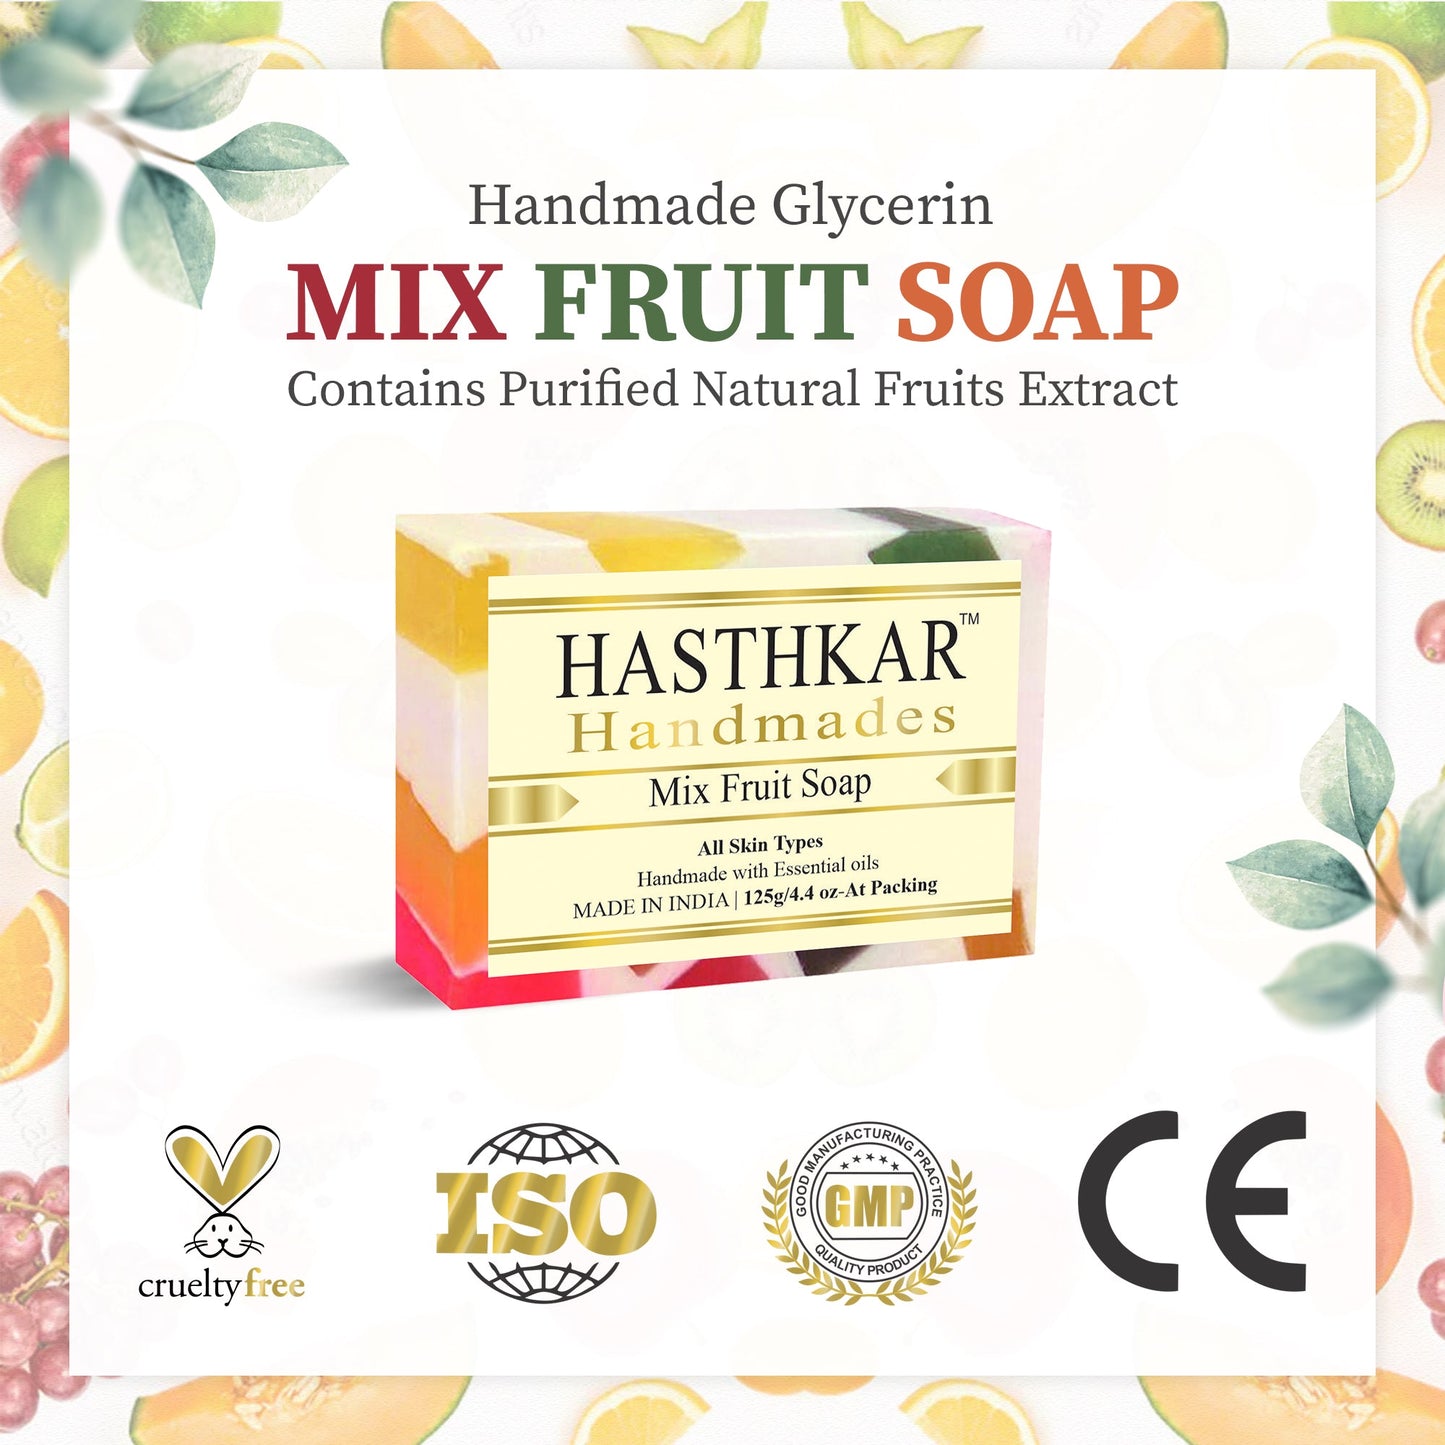 Hasthkar Handmades Glycerine Mix Fruit Soap For Cleanses Skin And Body Of Infections | Toxins And Dirt | Removes Dead Cells And Refreshes The Skin - 125Gm